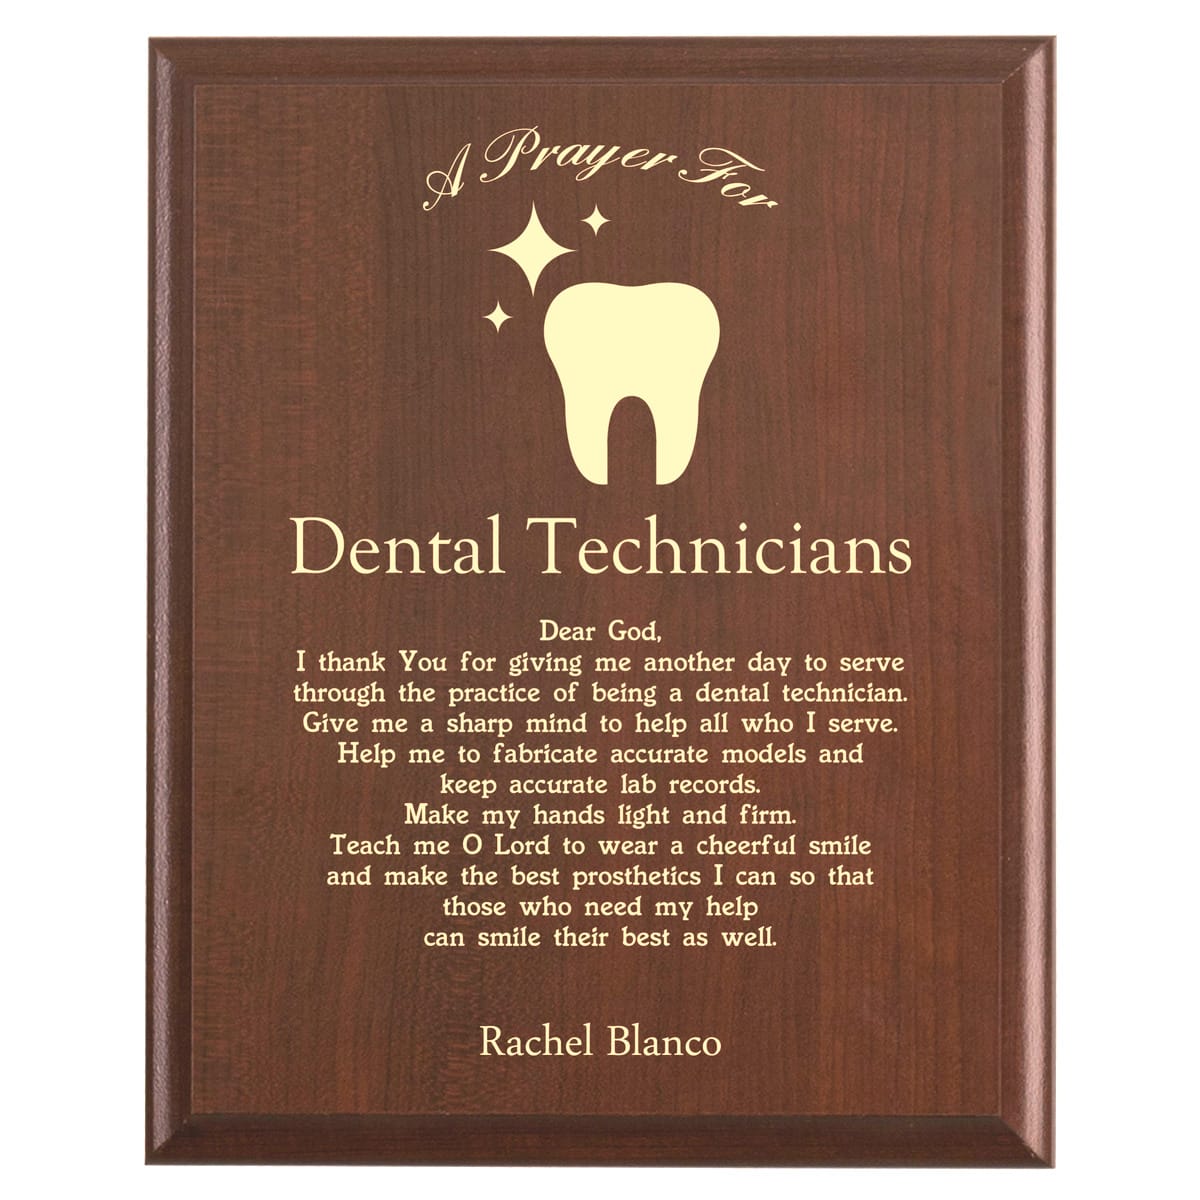 Plaque photo: Designed for Dental Technicians with free personalization. Wood style finish with customized text.